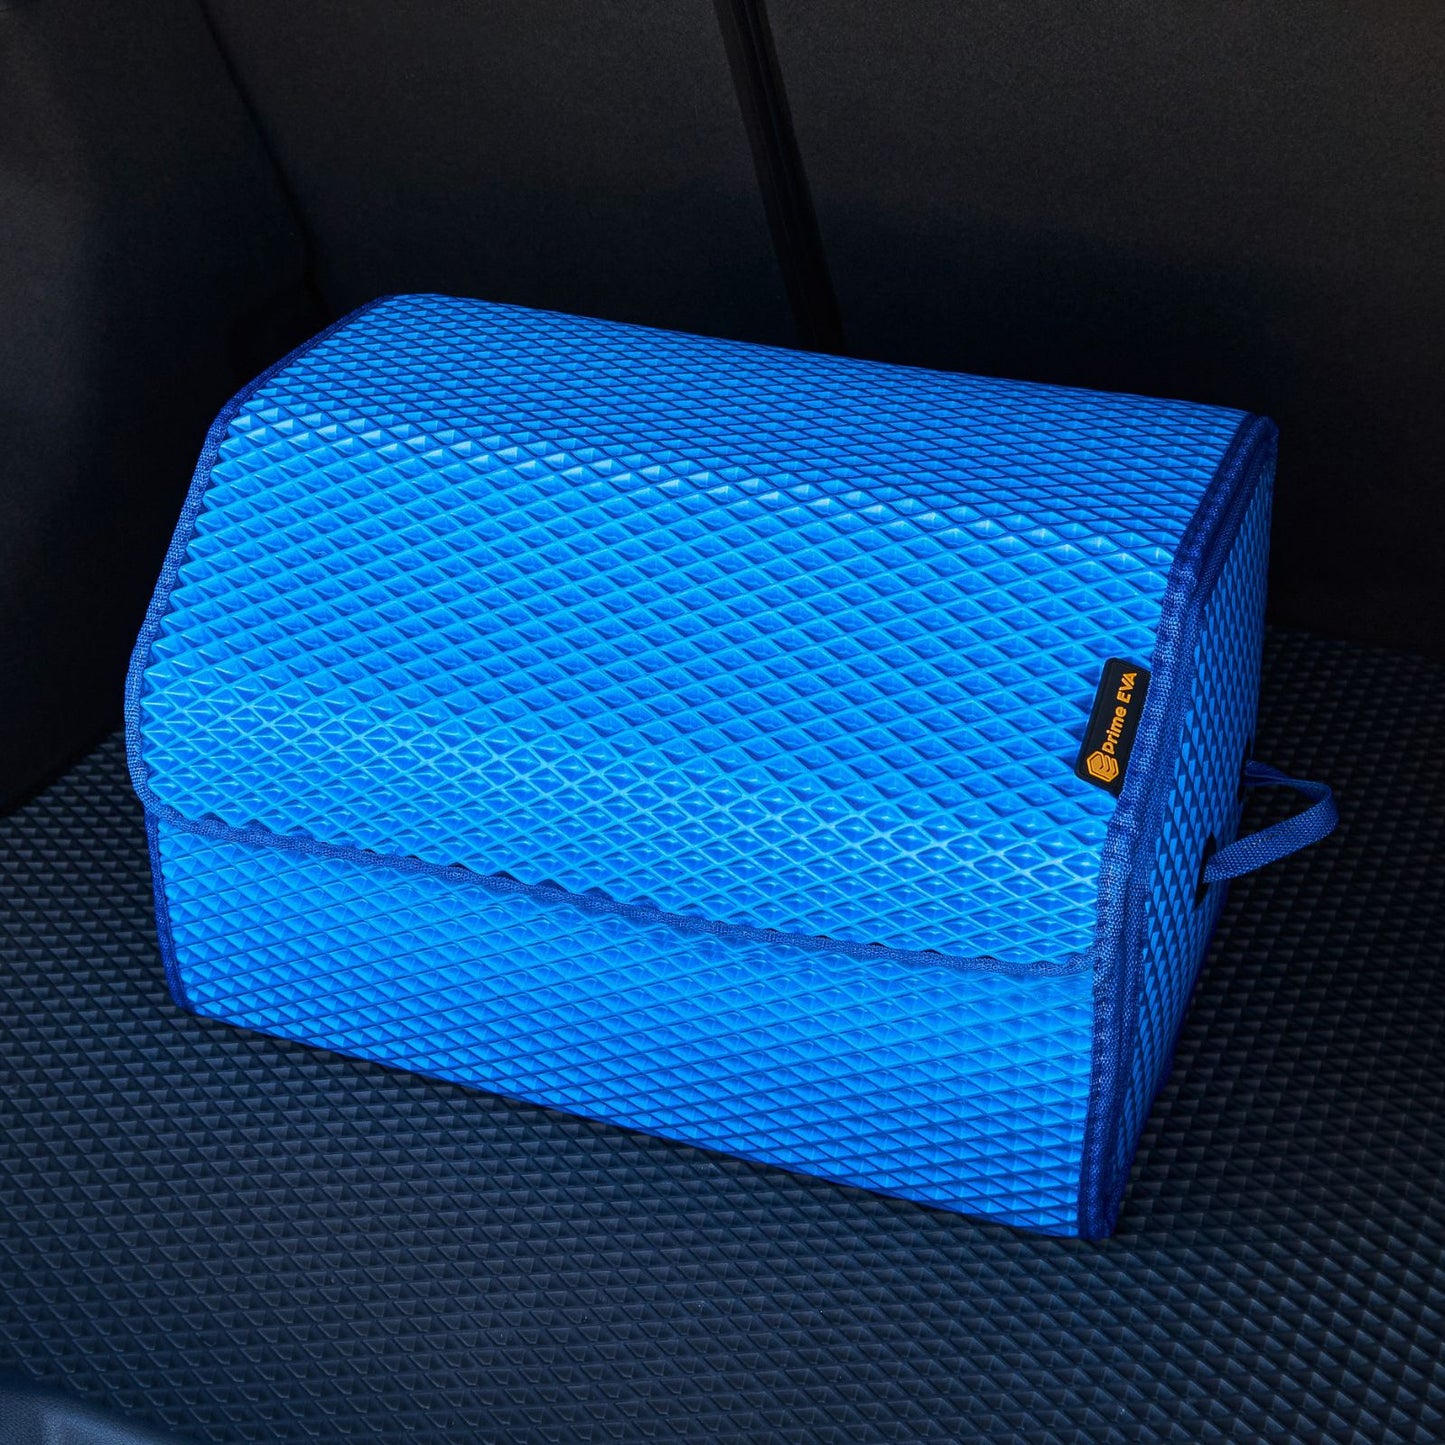 Large blue cargo storage organizer for vehicle trunks, showing spacious compartments and sturdy design.